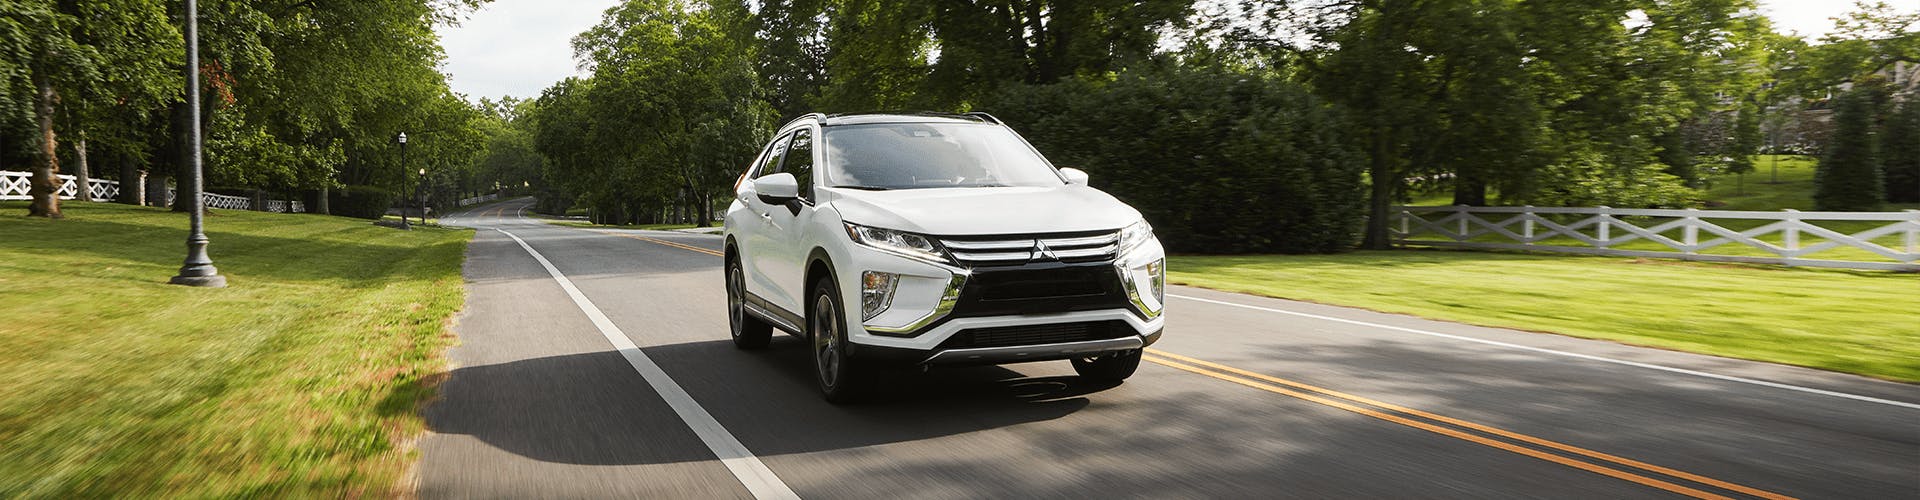 2020 eclipse cross - white exterior - banner image